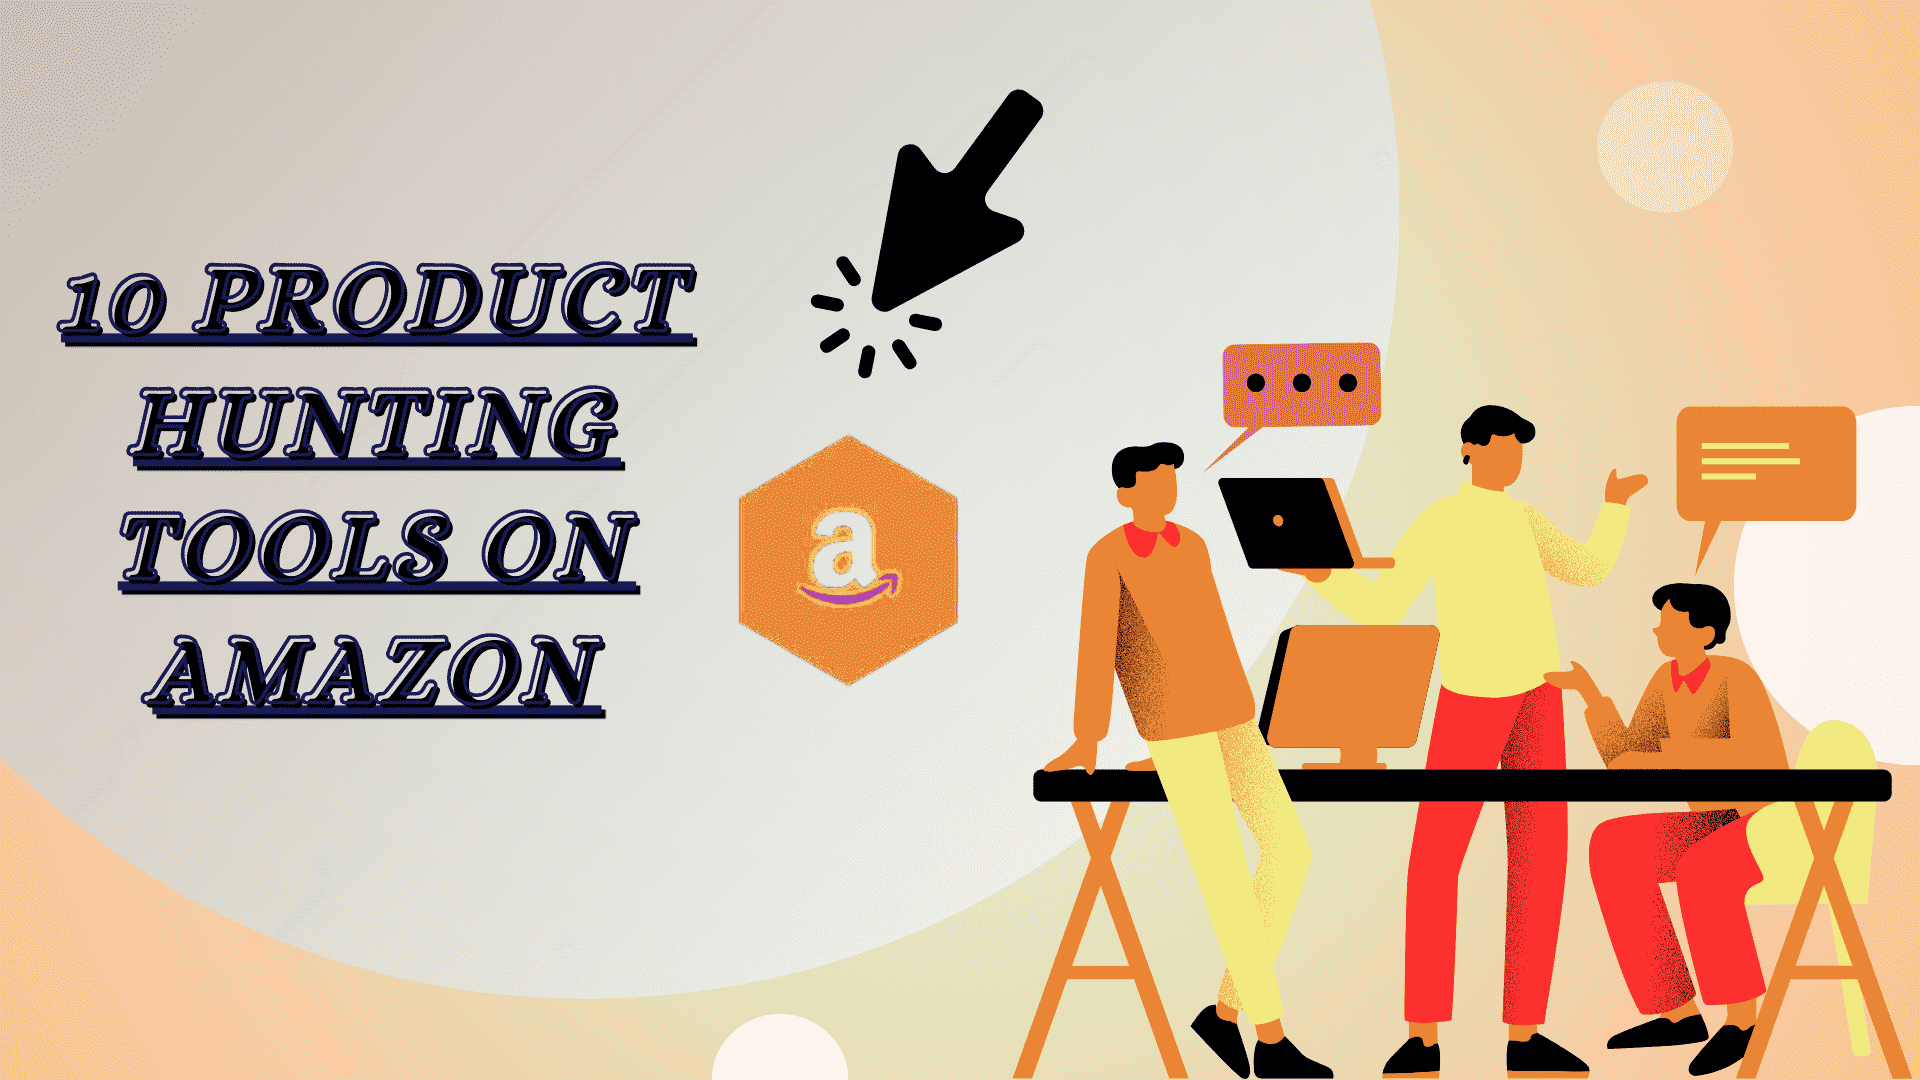 10 Product Hunting tools for Amazon